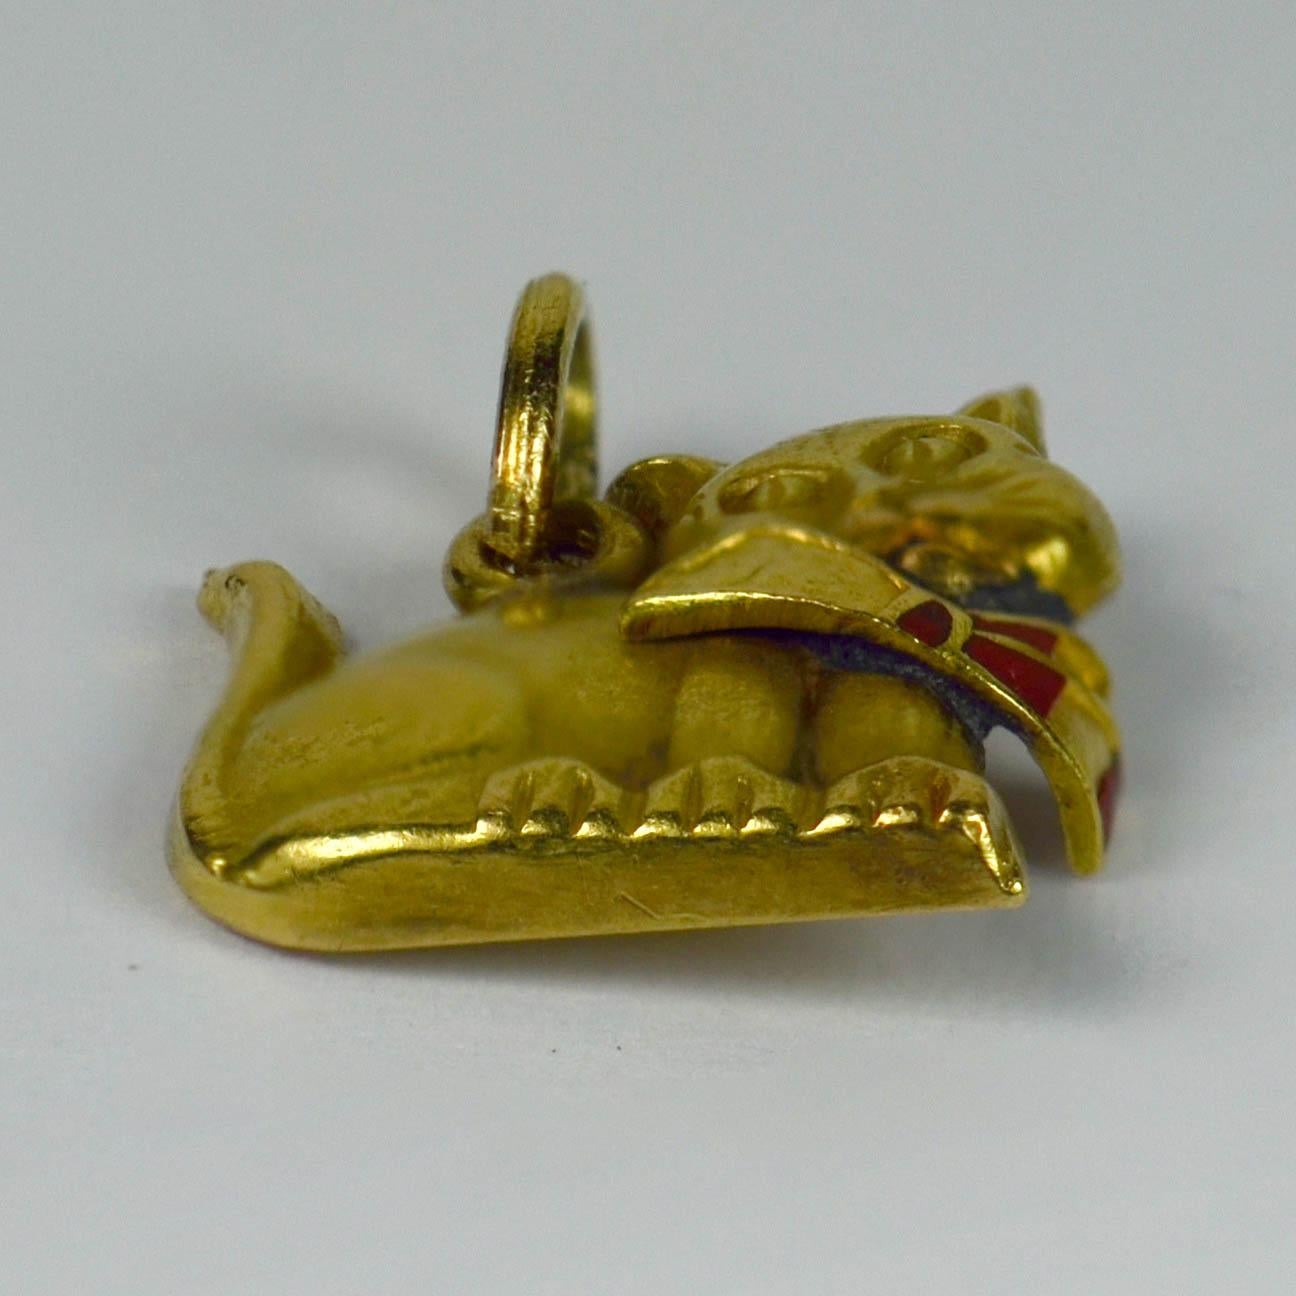 An 18 karat yellow gold charm pendant designed as a cat in relief with a red enamel bow. Marked 18K.
Losses to the enamel and abrasions to the cat. Old solder repair to bow.

Dimensions: 1.1 x 1 x 0.2 cm
Weight: 0.70 grams